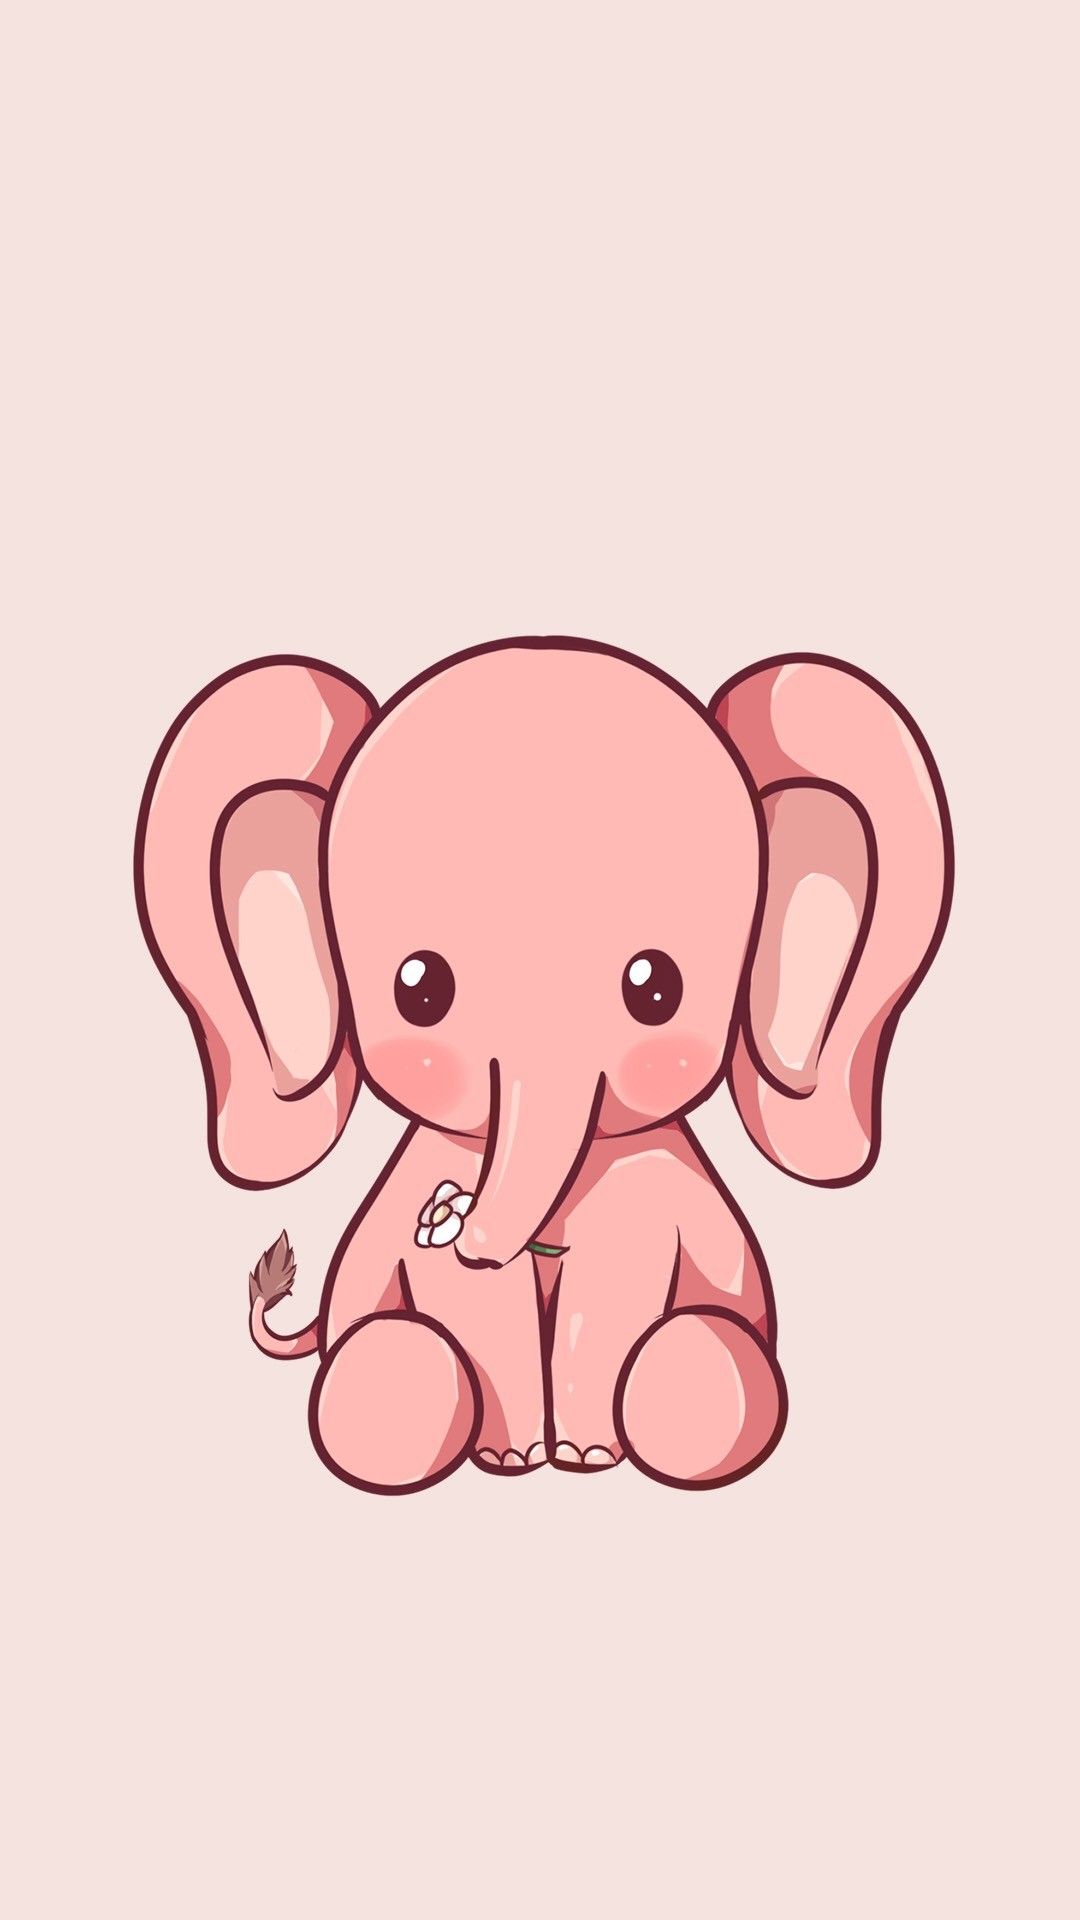 Elephant Wallpaper Images  Free Photos PNG Stickers Wallpapers   Backgrounds  rawpixel